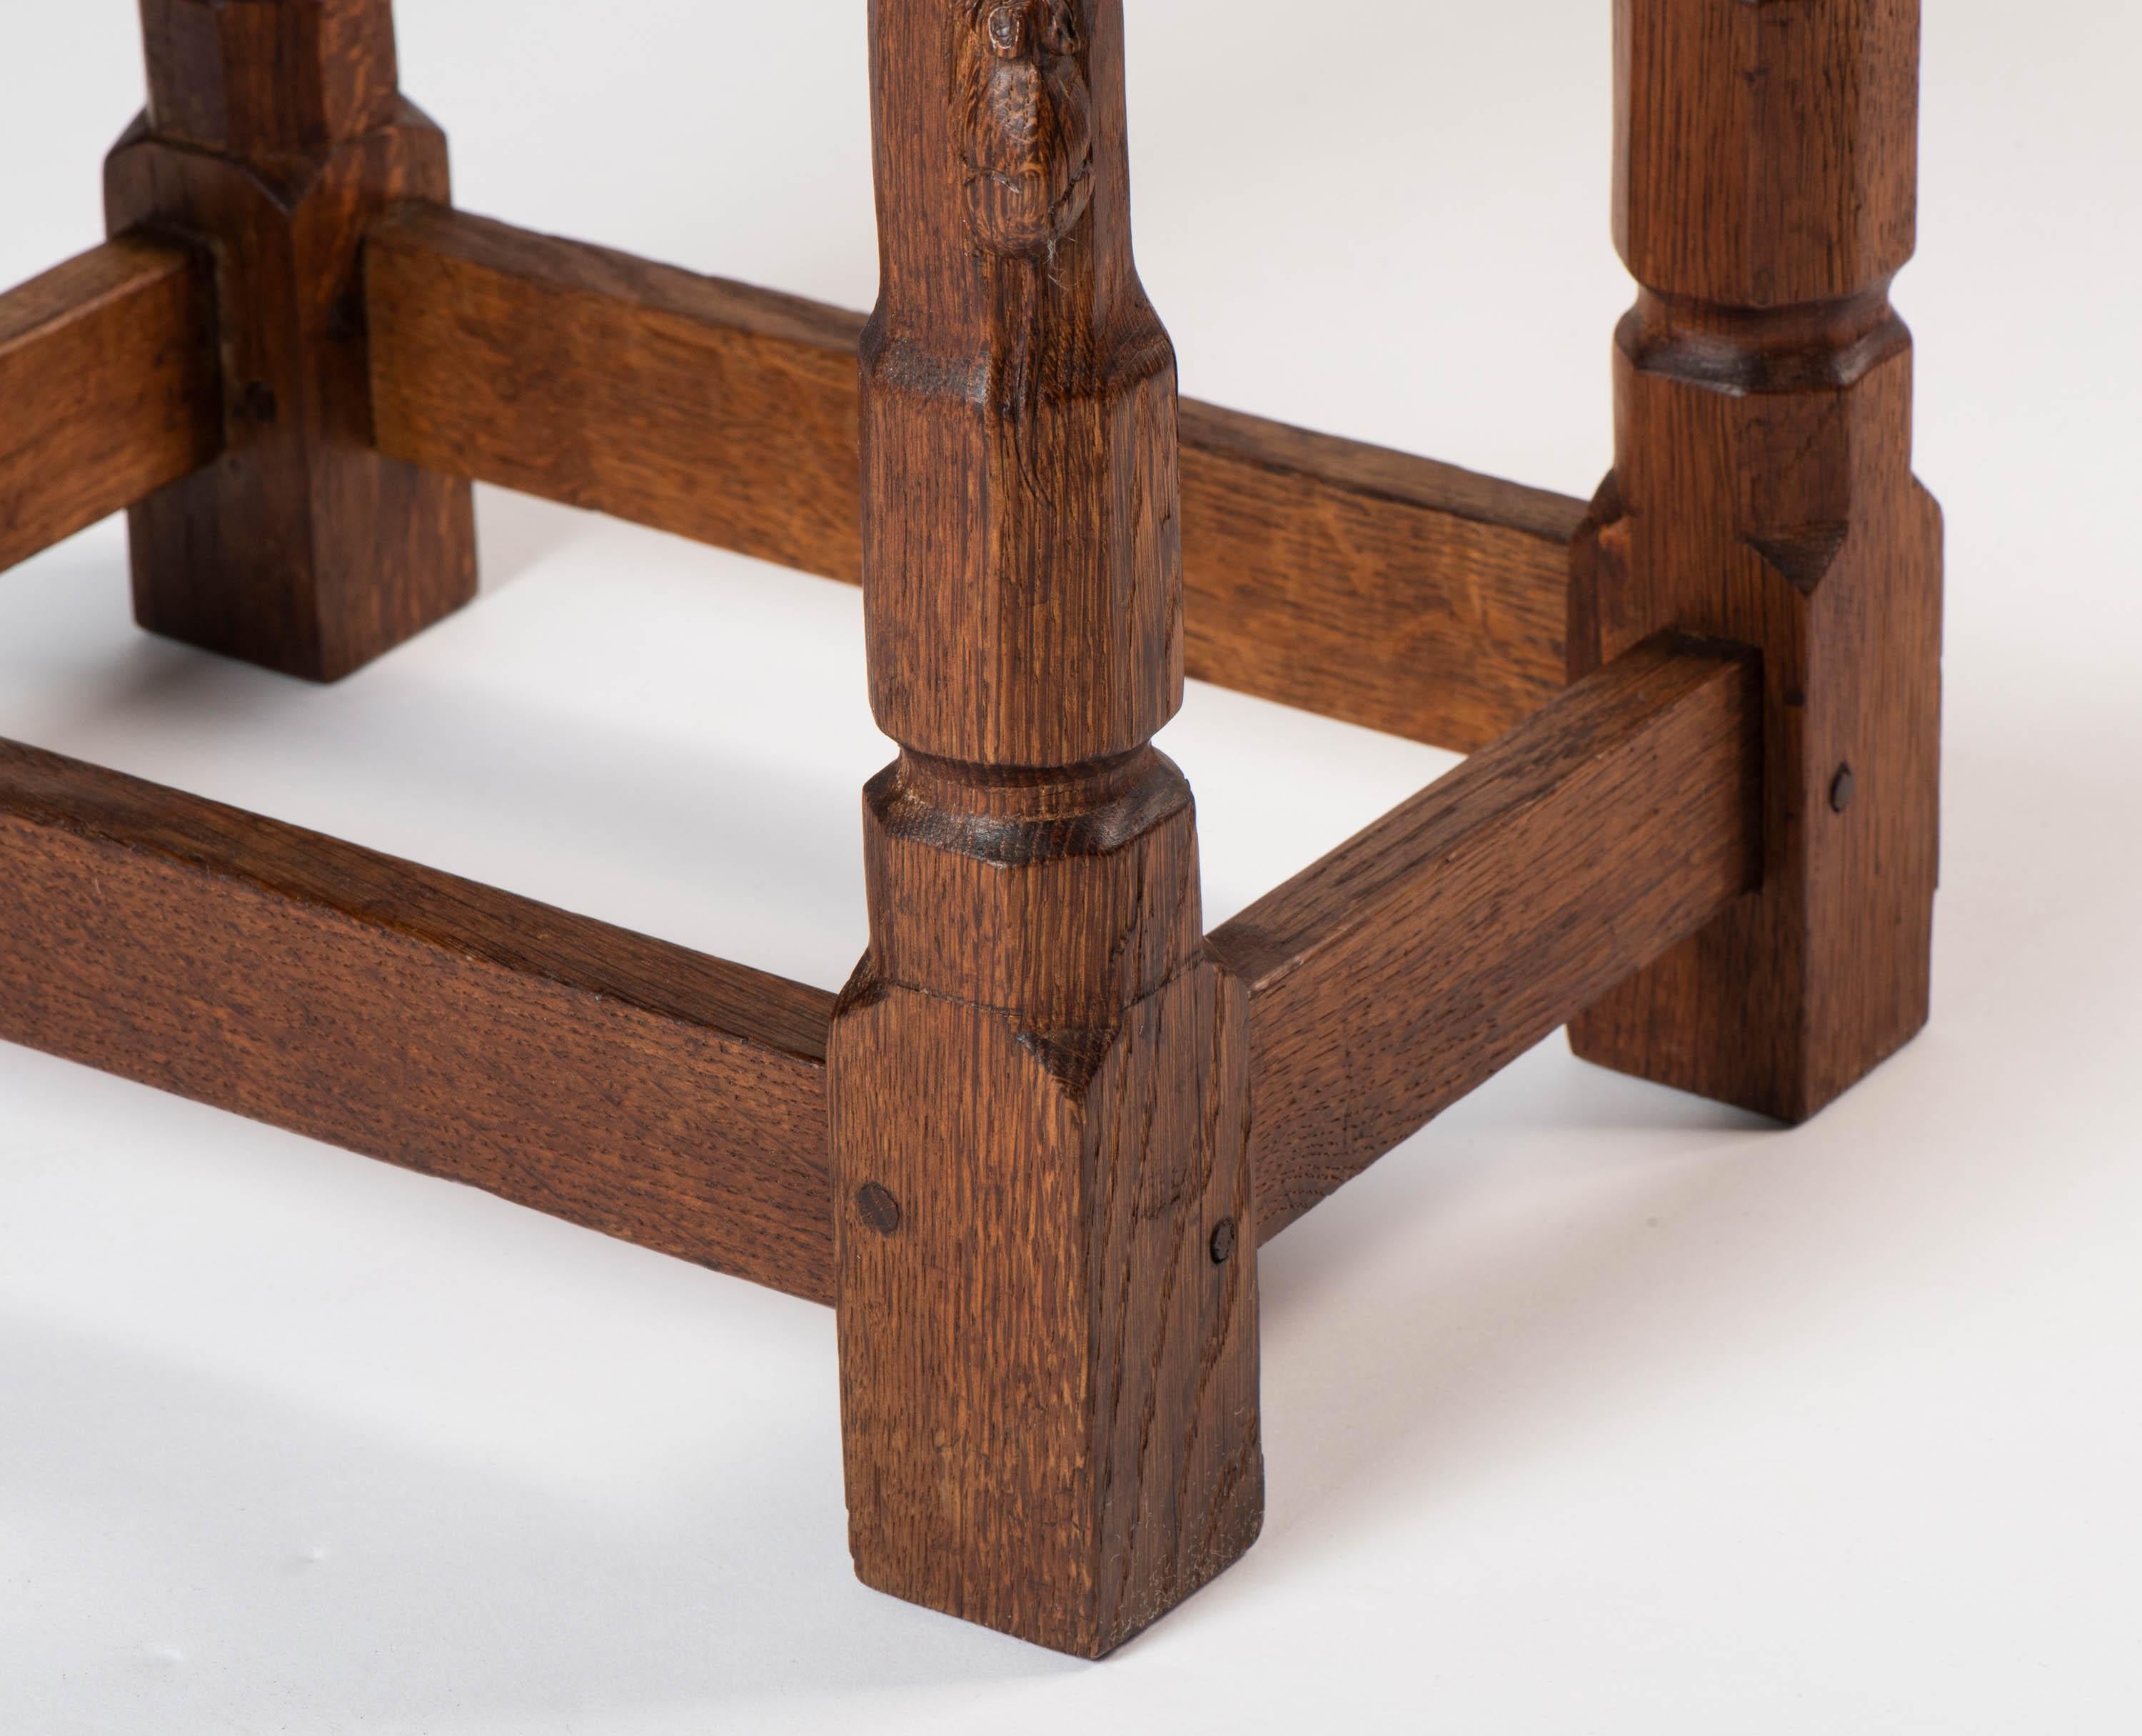 A Robert “Mouseman” Thompson rectangular stool.
English oak
Dished top on 4 octagonal legs with stretchers.
Carved mouse
English, circa 1940
Measures: 40 cm wide x 28 cm deep x 37 cm high.
 